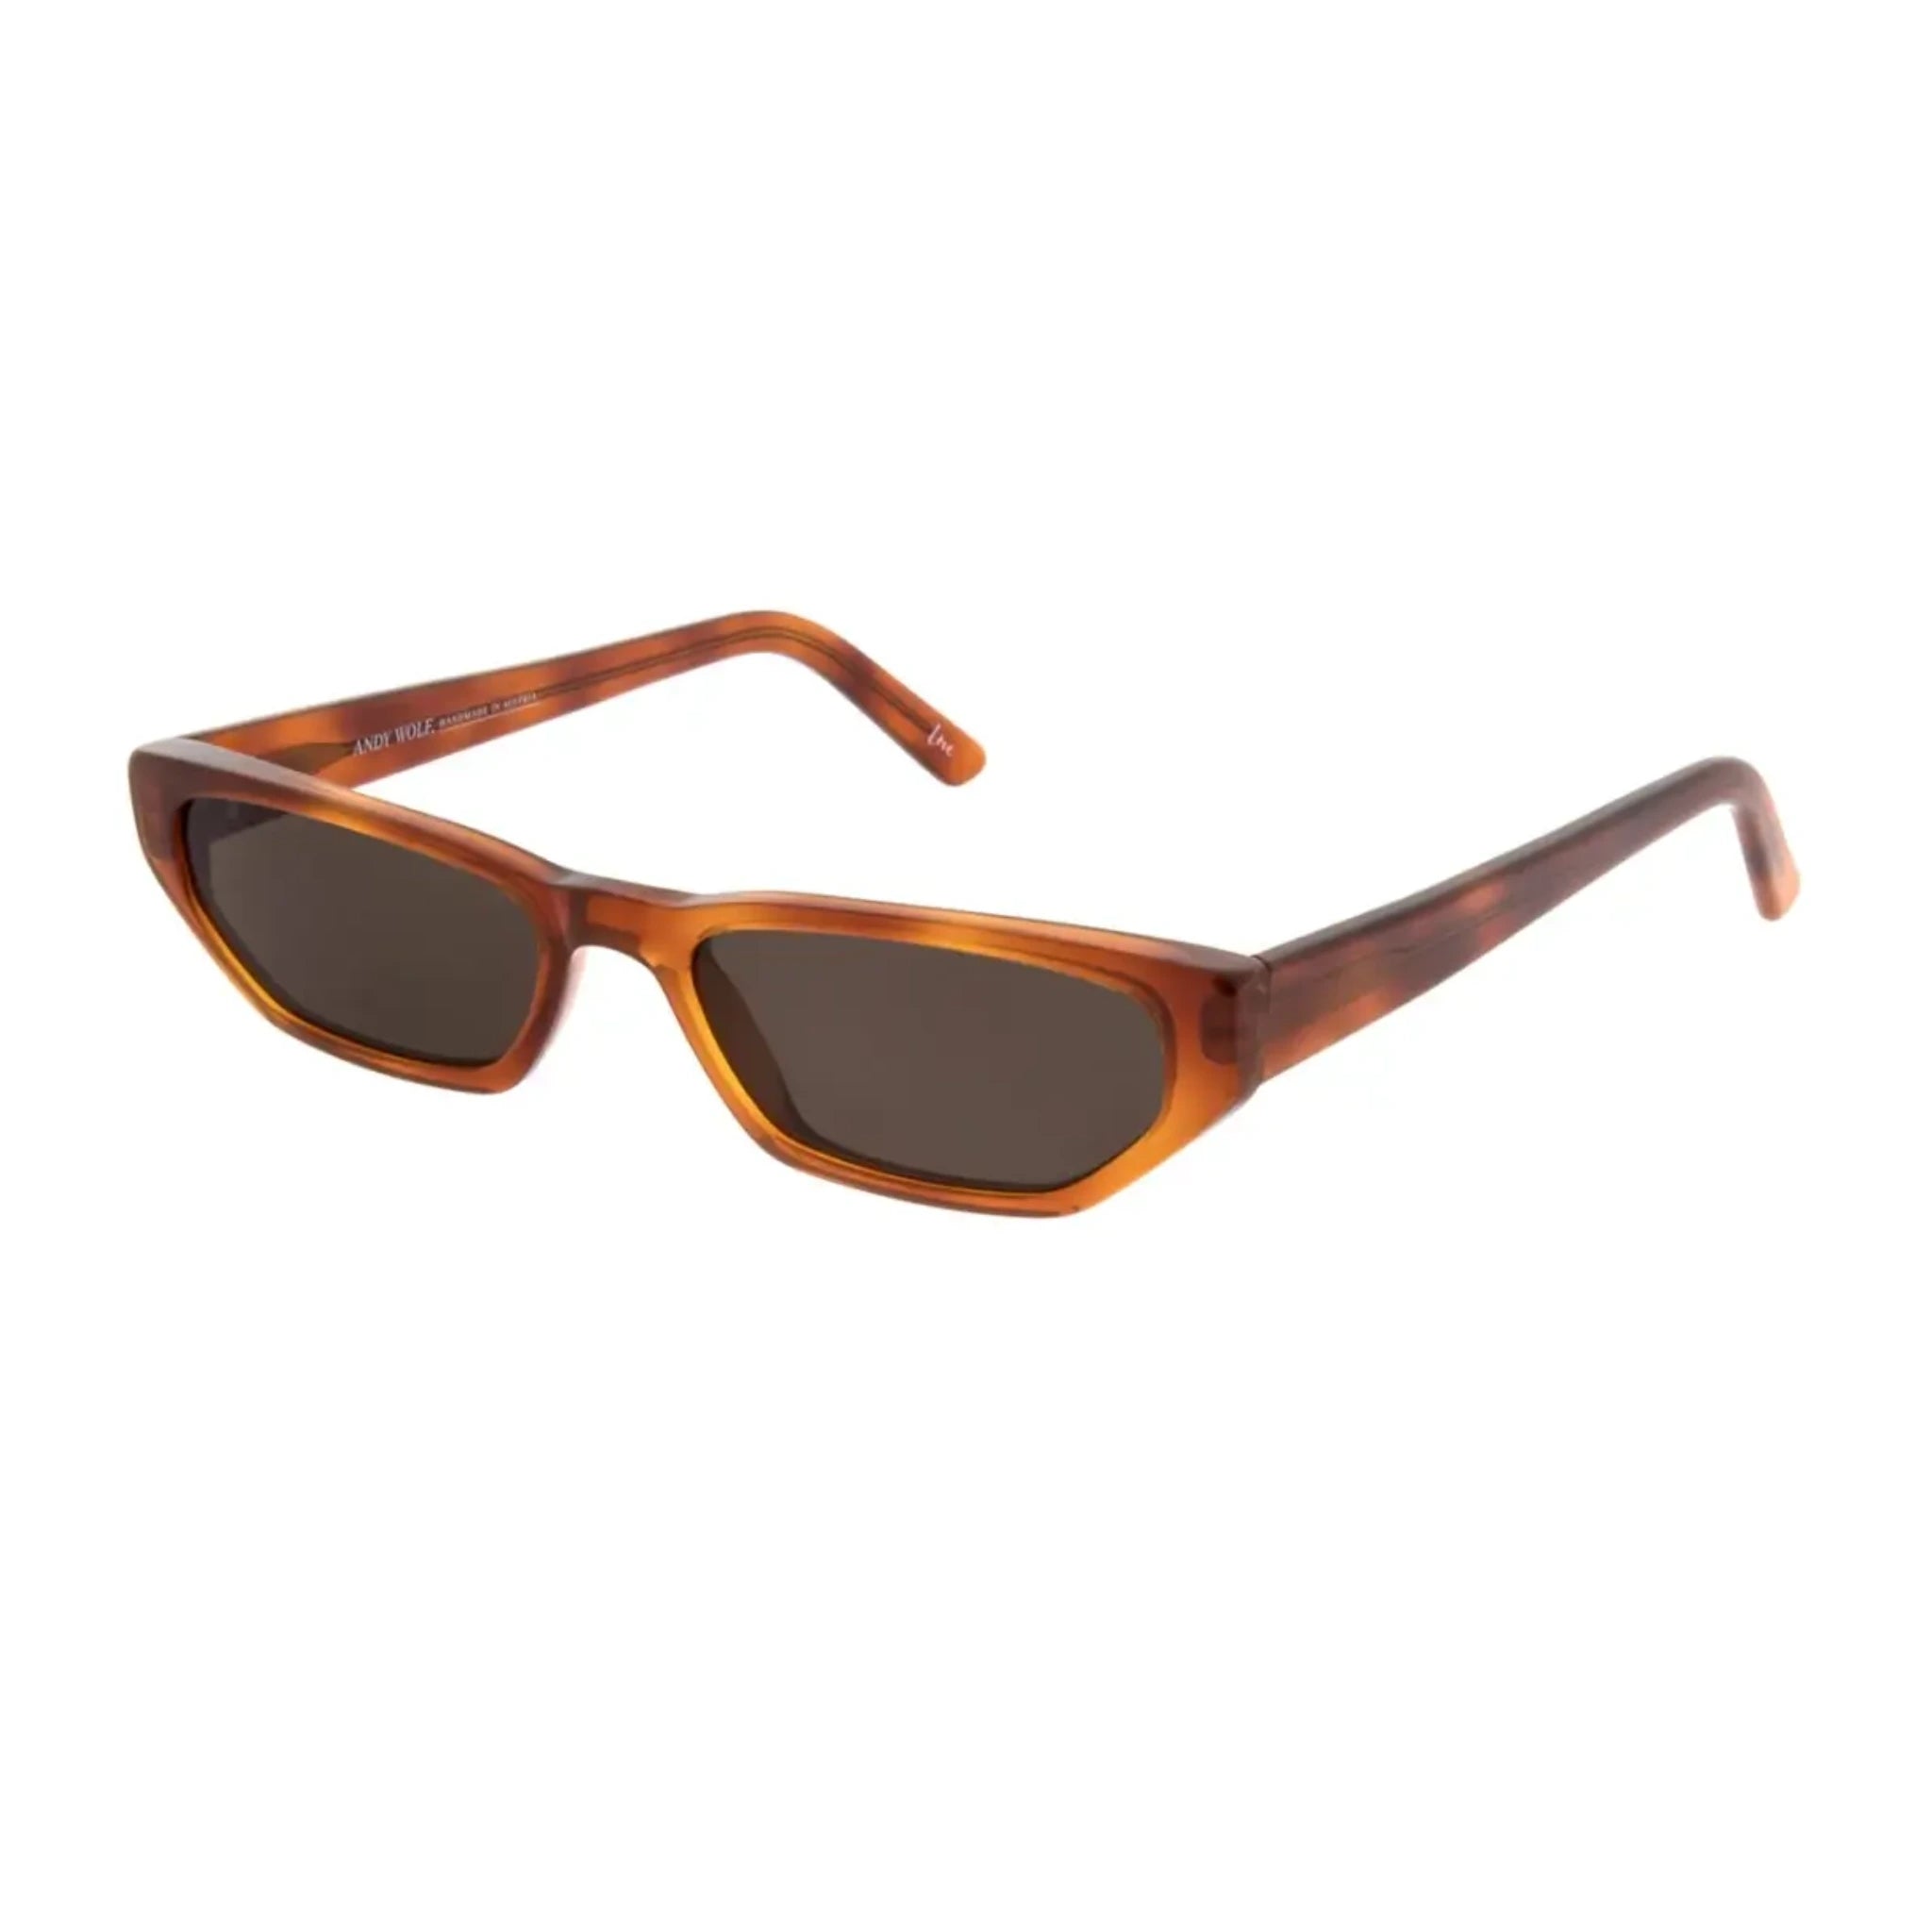 Andy Wolf polarized sunglasses